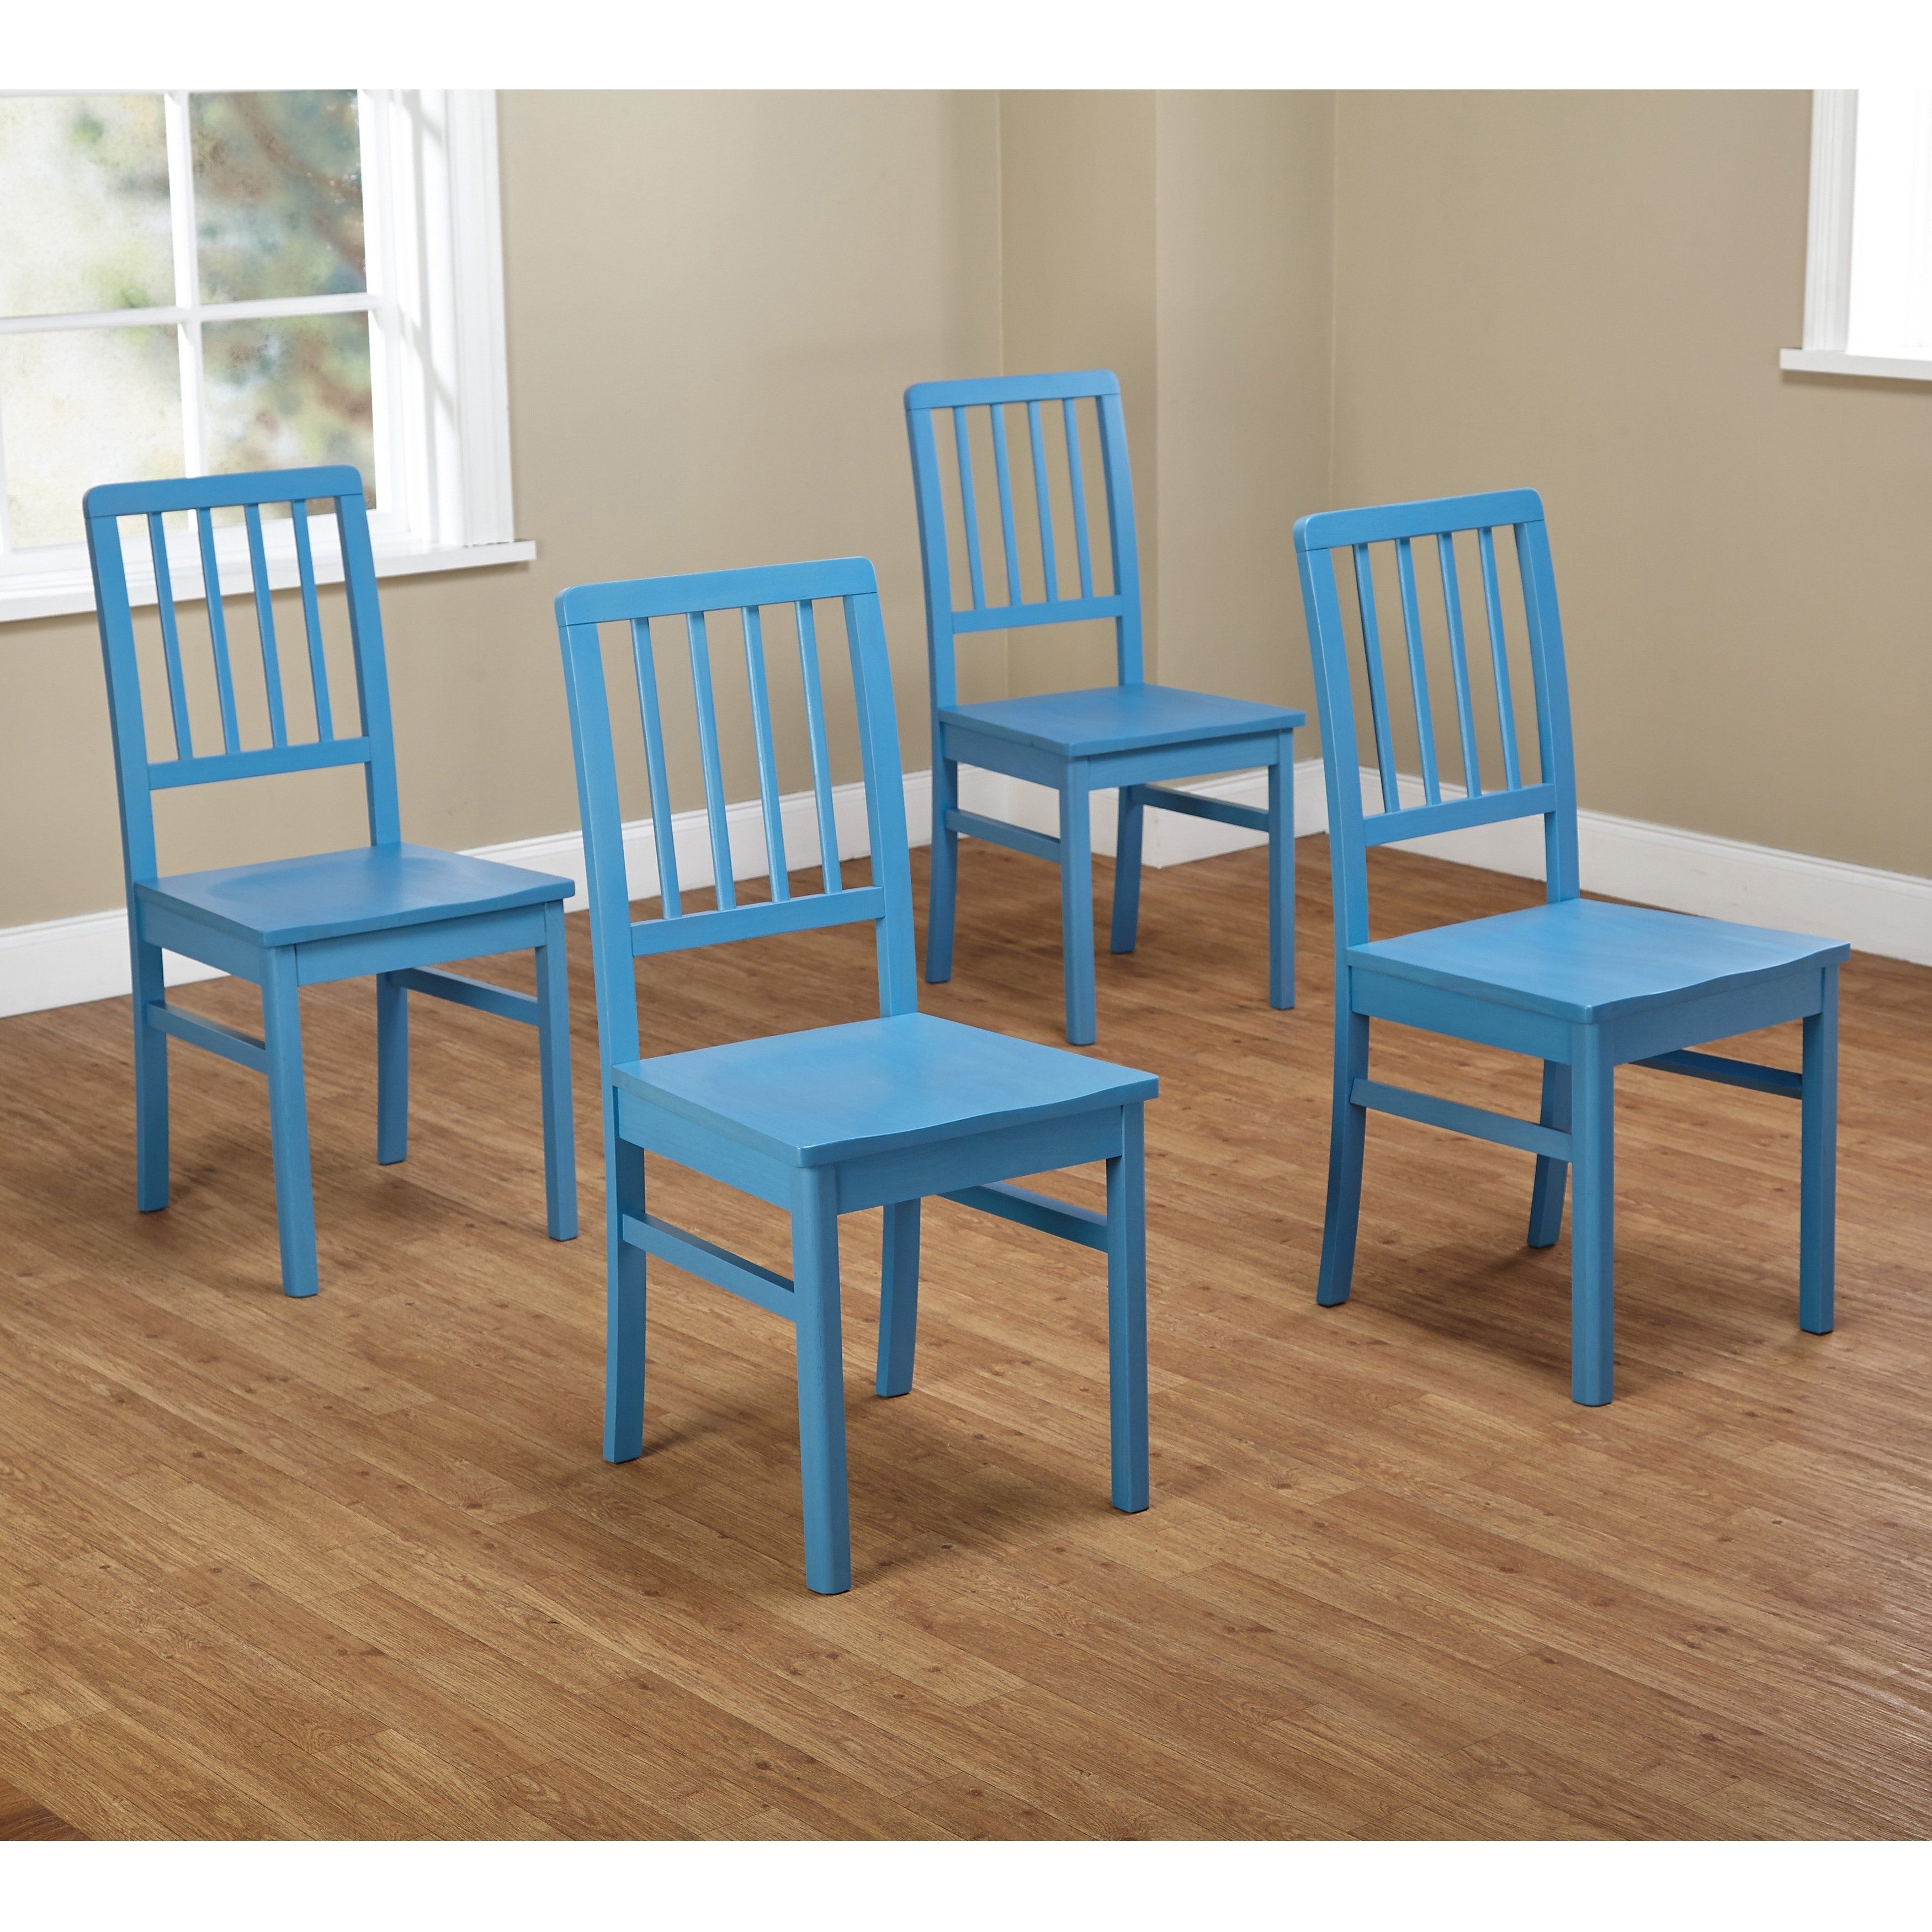 Most Recent Camden Dining Chairs Inside Shop Simple Living Camden Dining Chair (set Of 4) – Free Shipping (Photo 6 of 20)